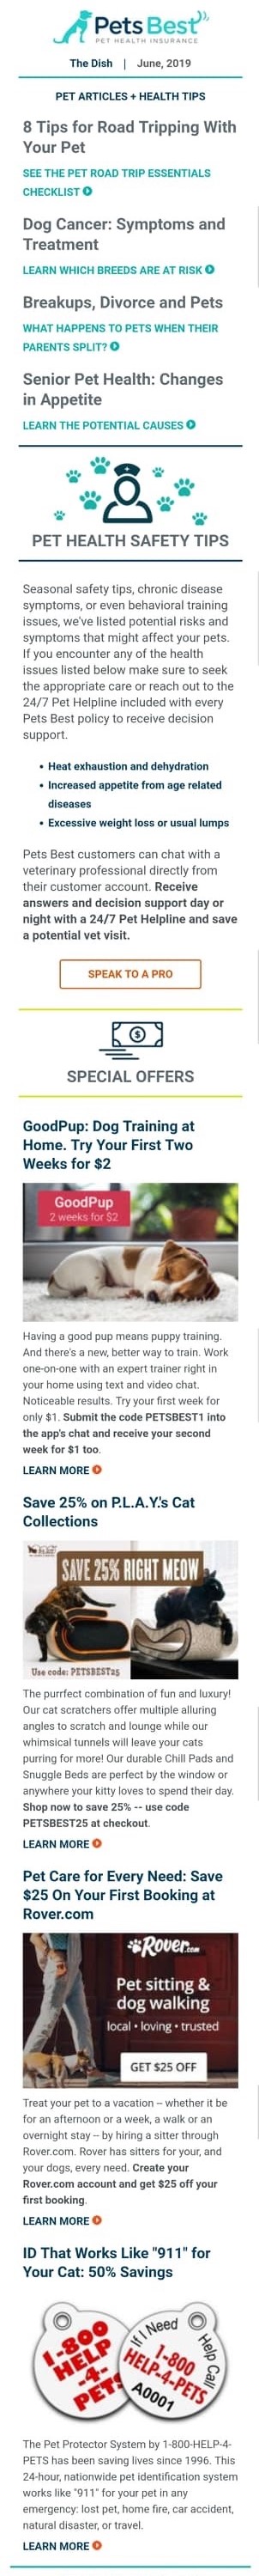 The Pets Best email includes content on the company offer and articles helpful for the pets owners